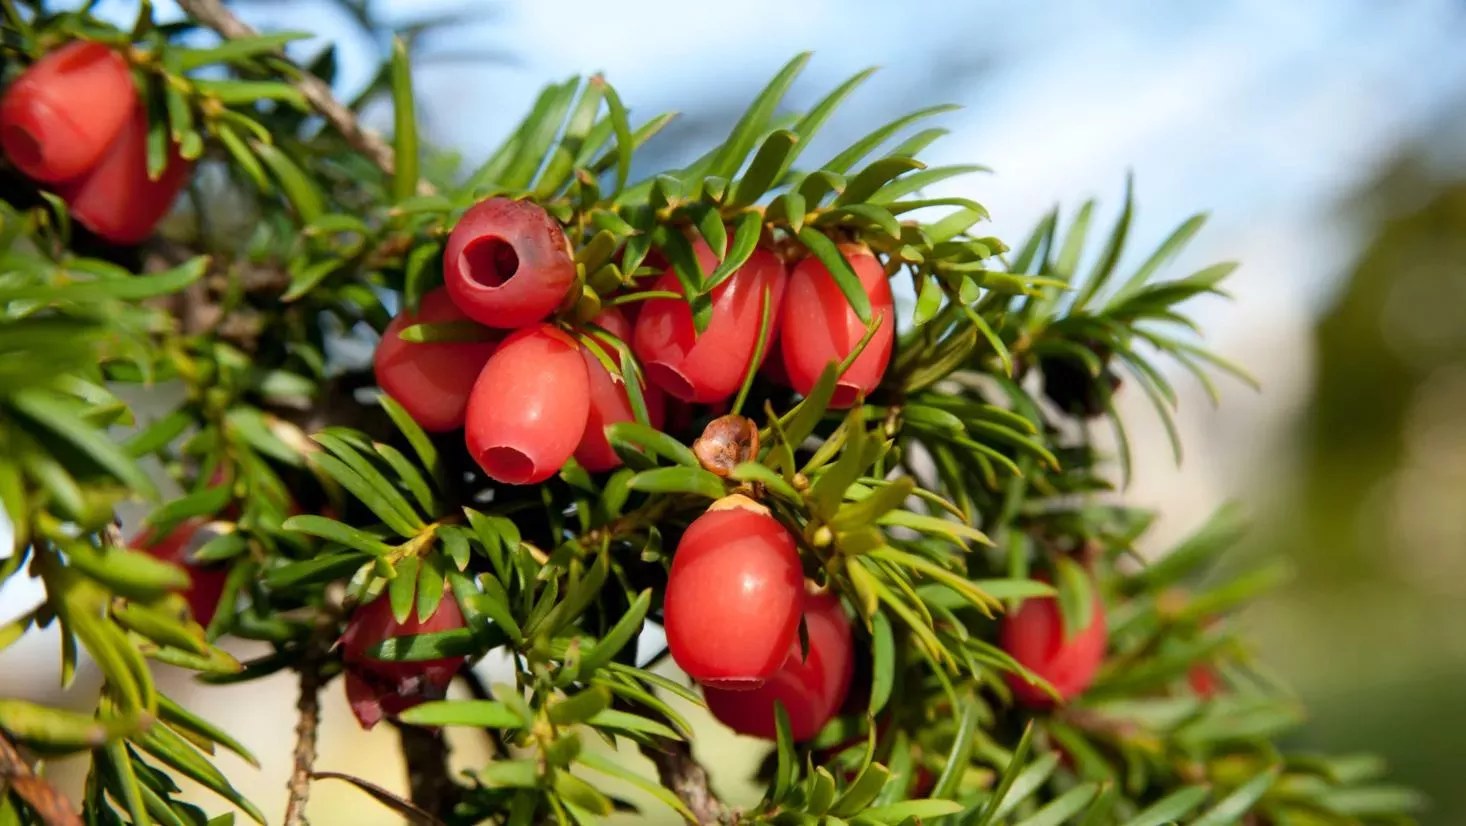 The red berries of a yew tree